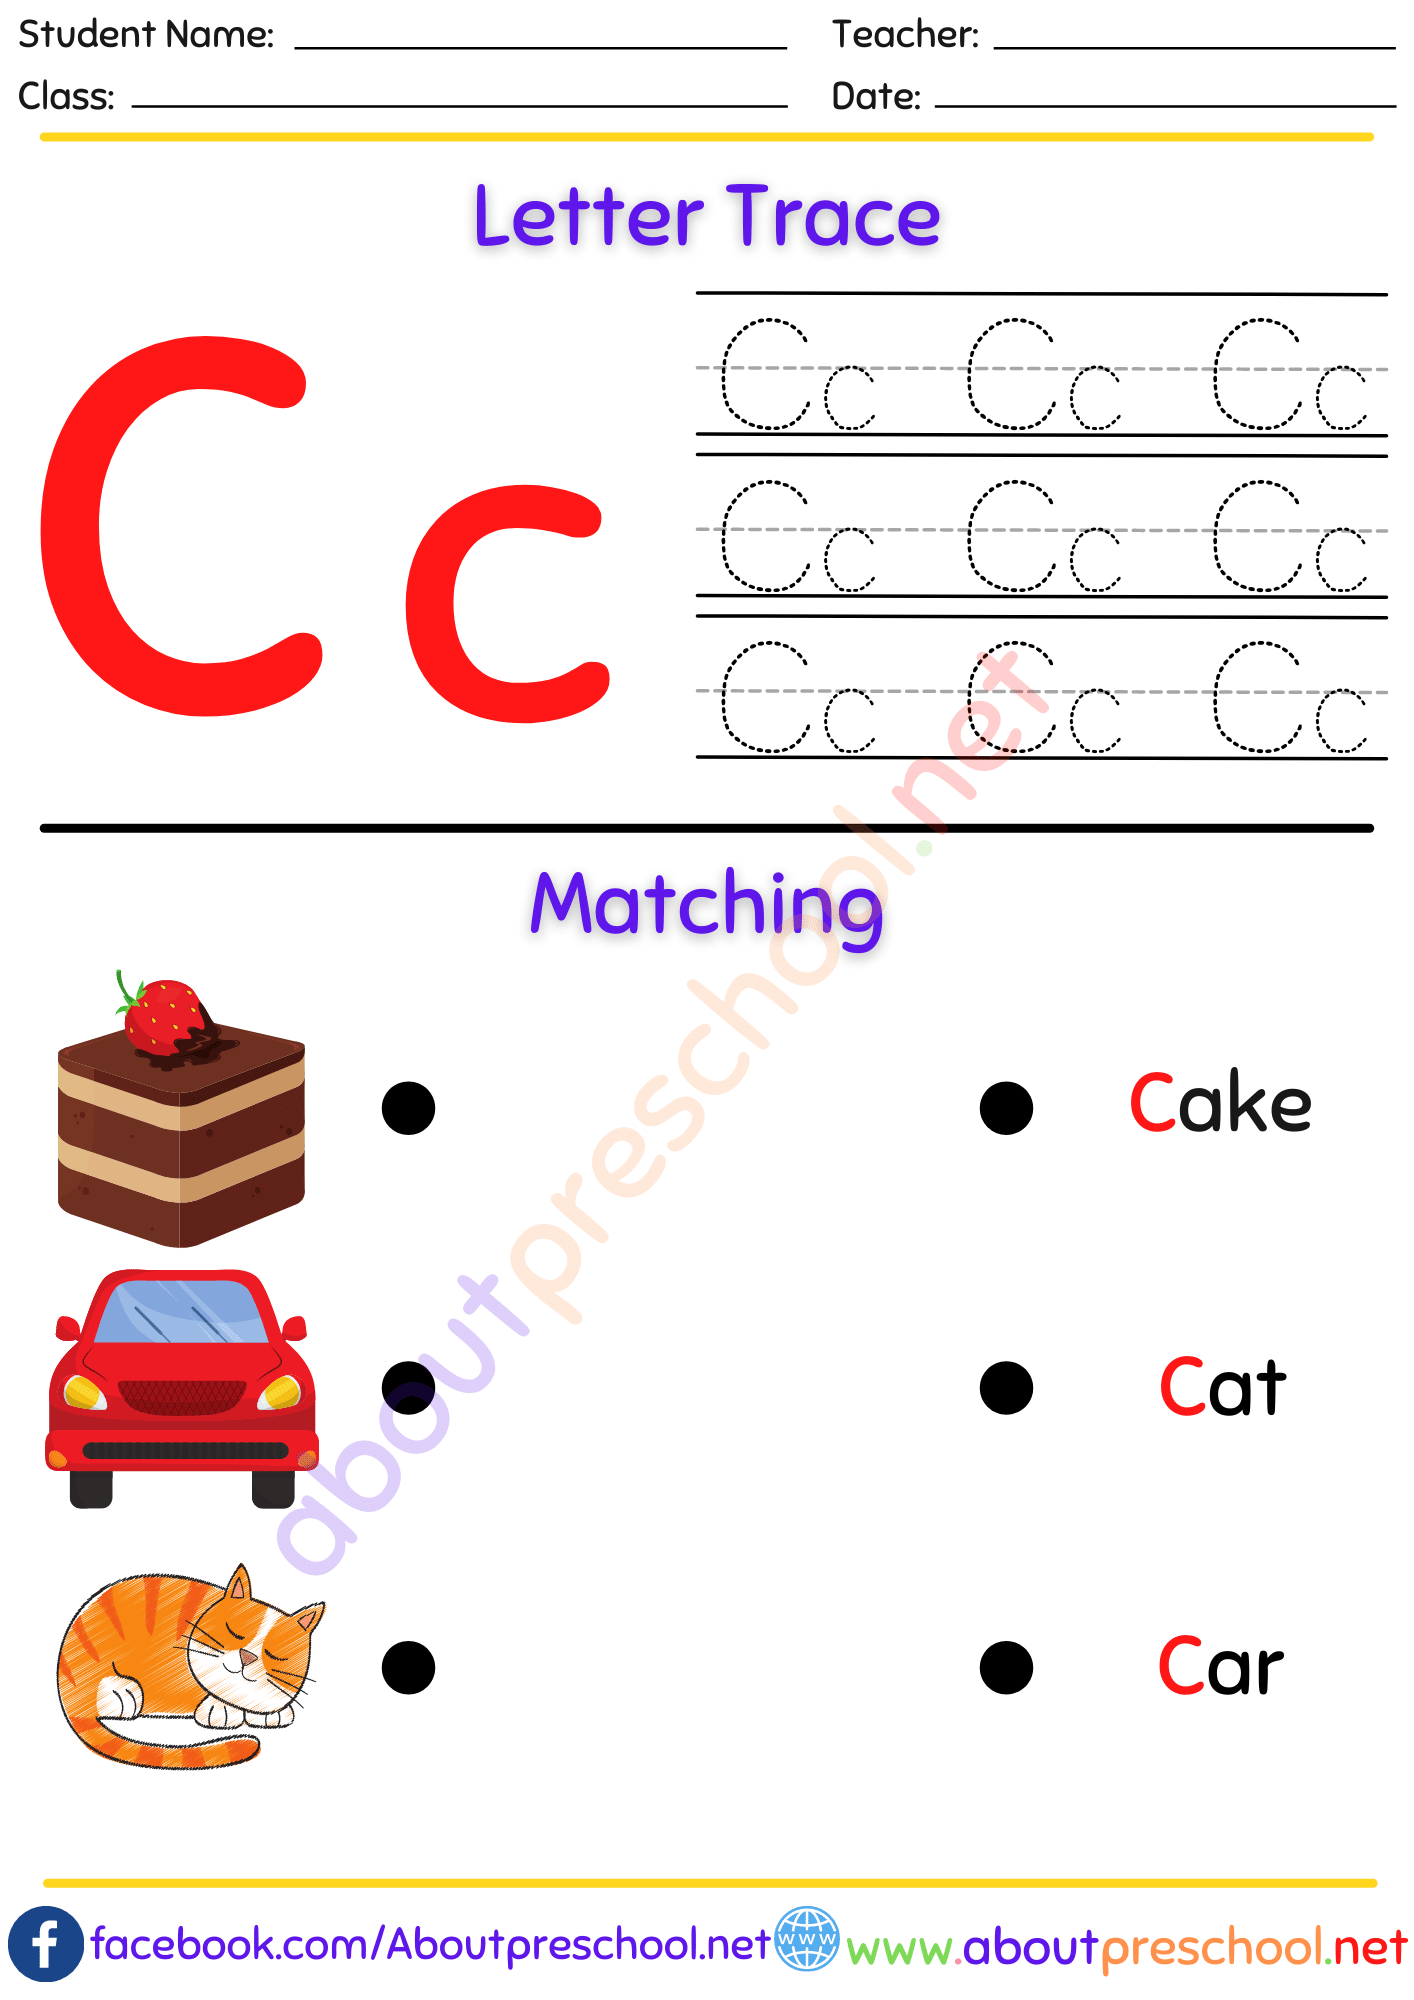 Letter Trace and Matching C